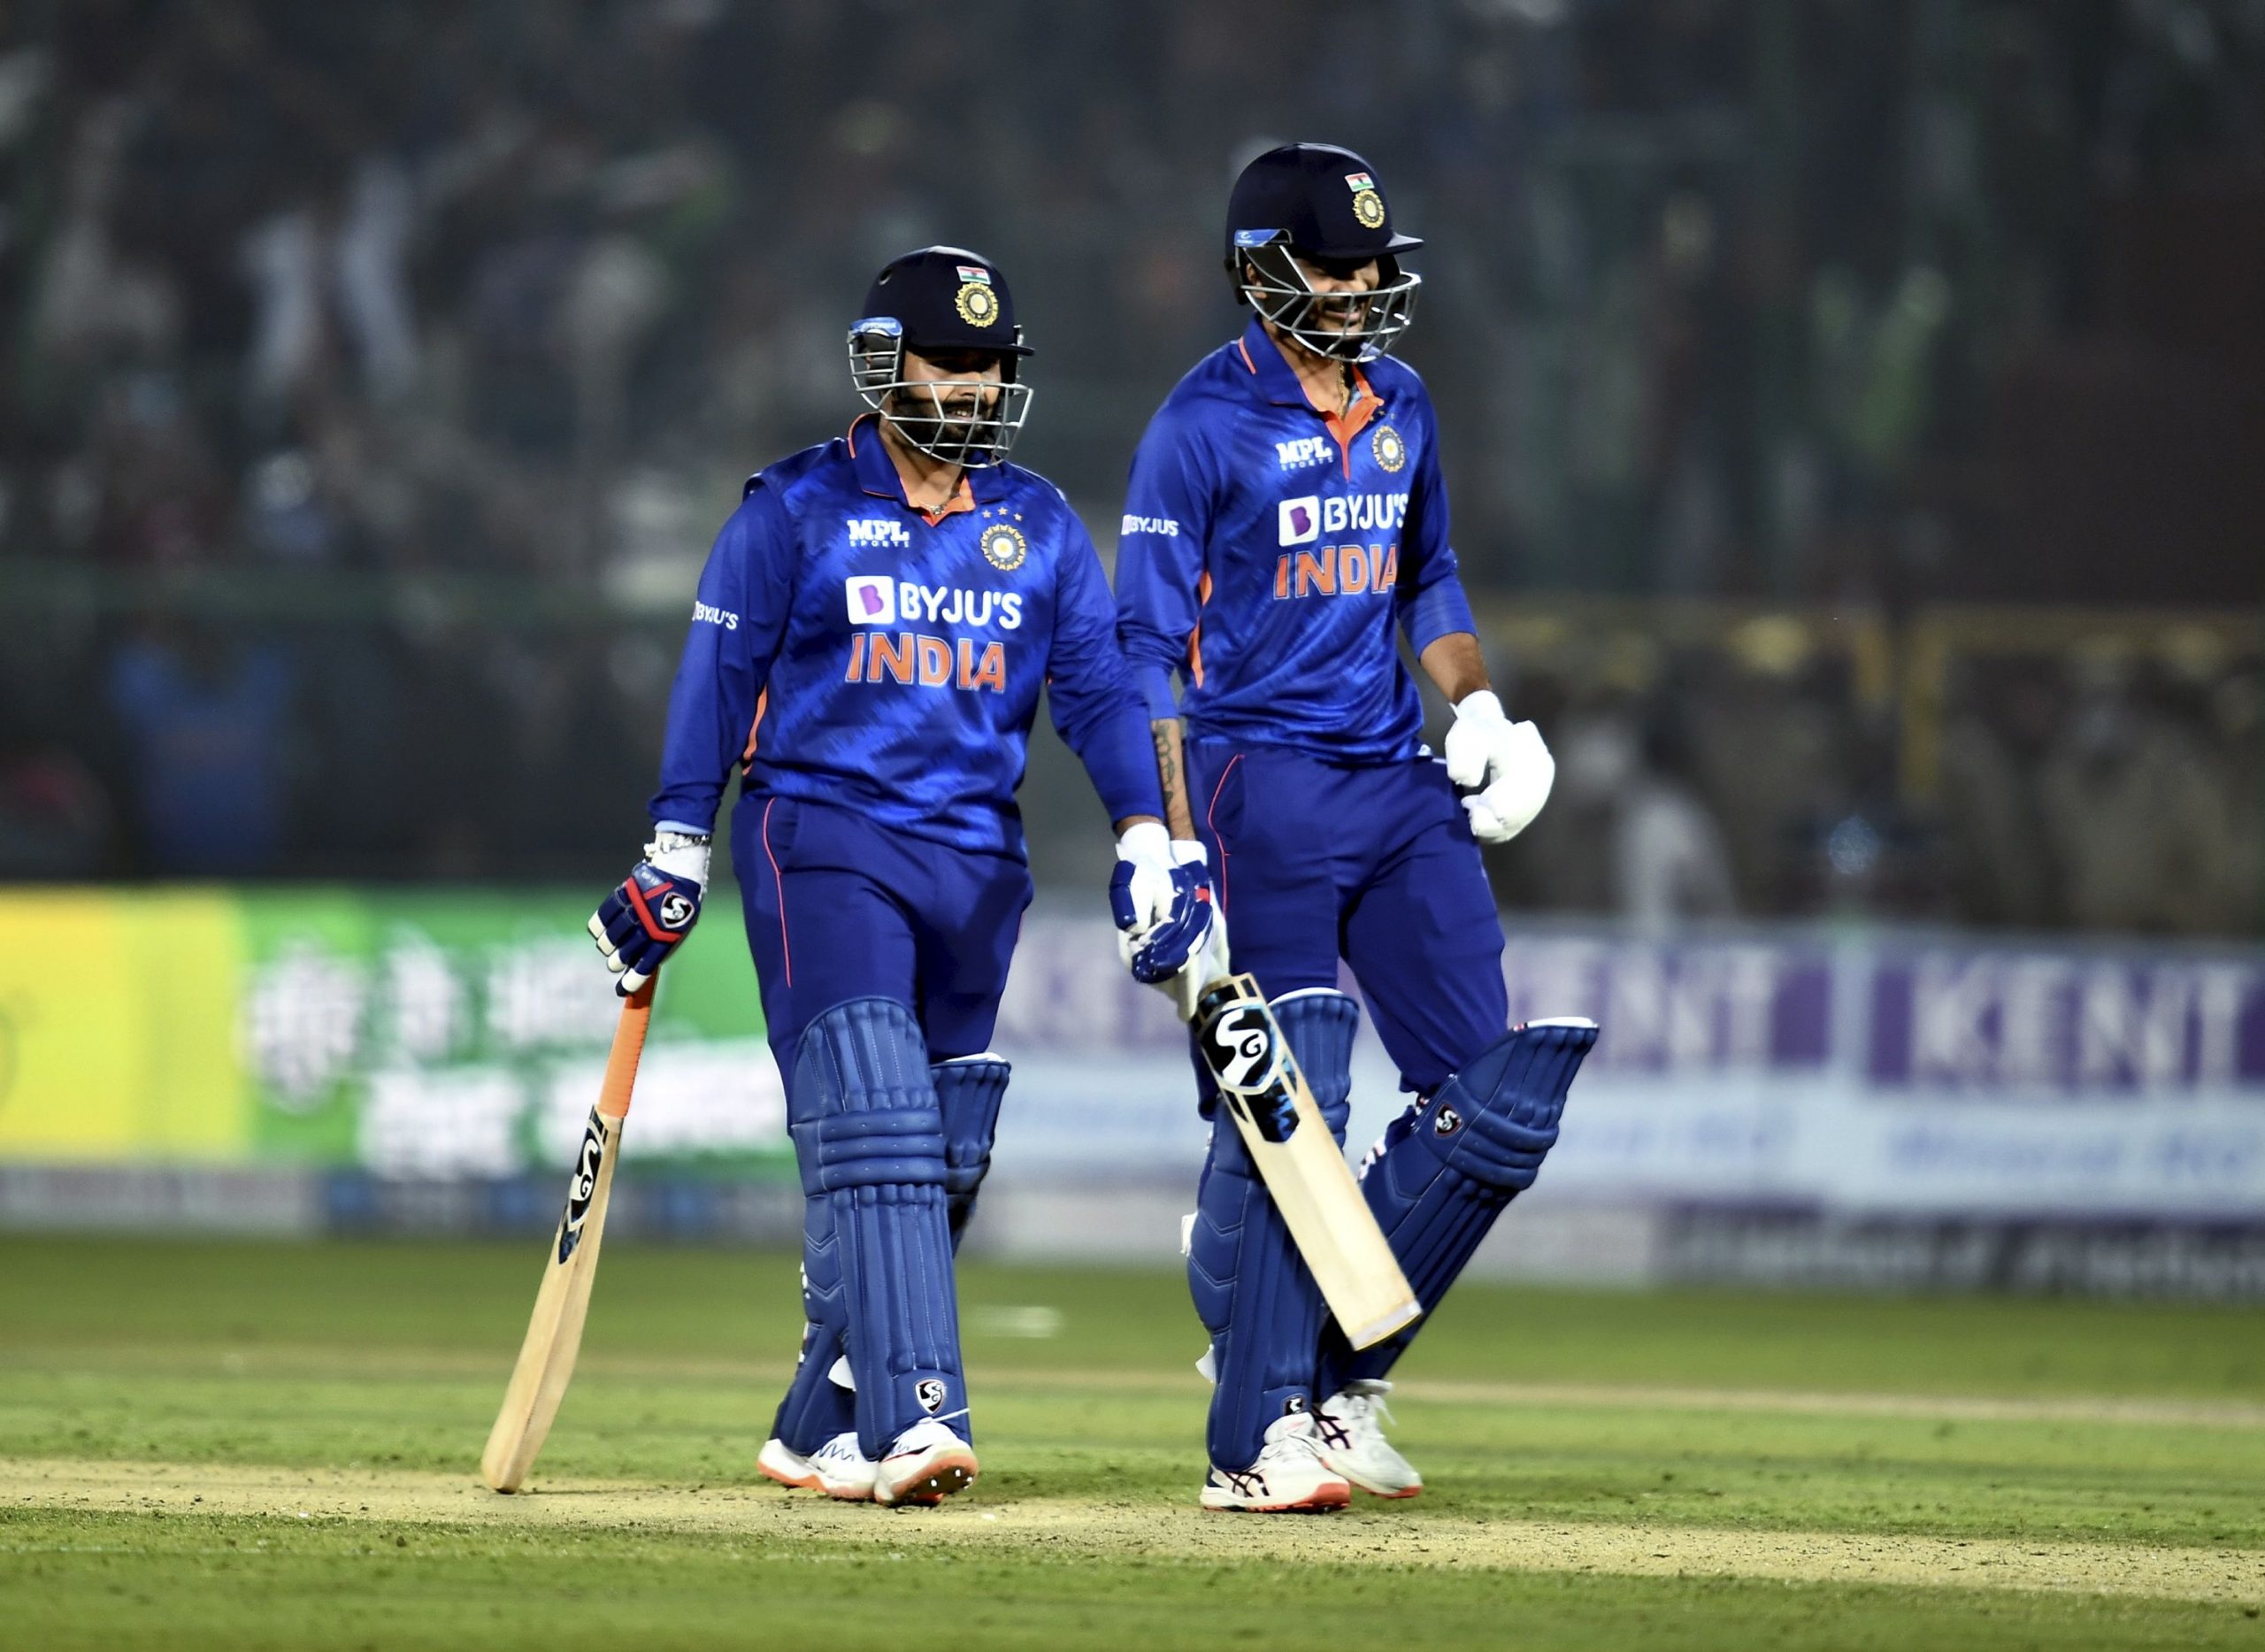 India vs New Zealand, 1st T20I: Top moments from the match